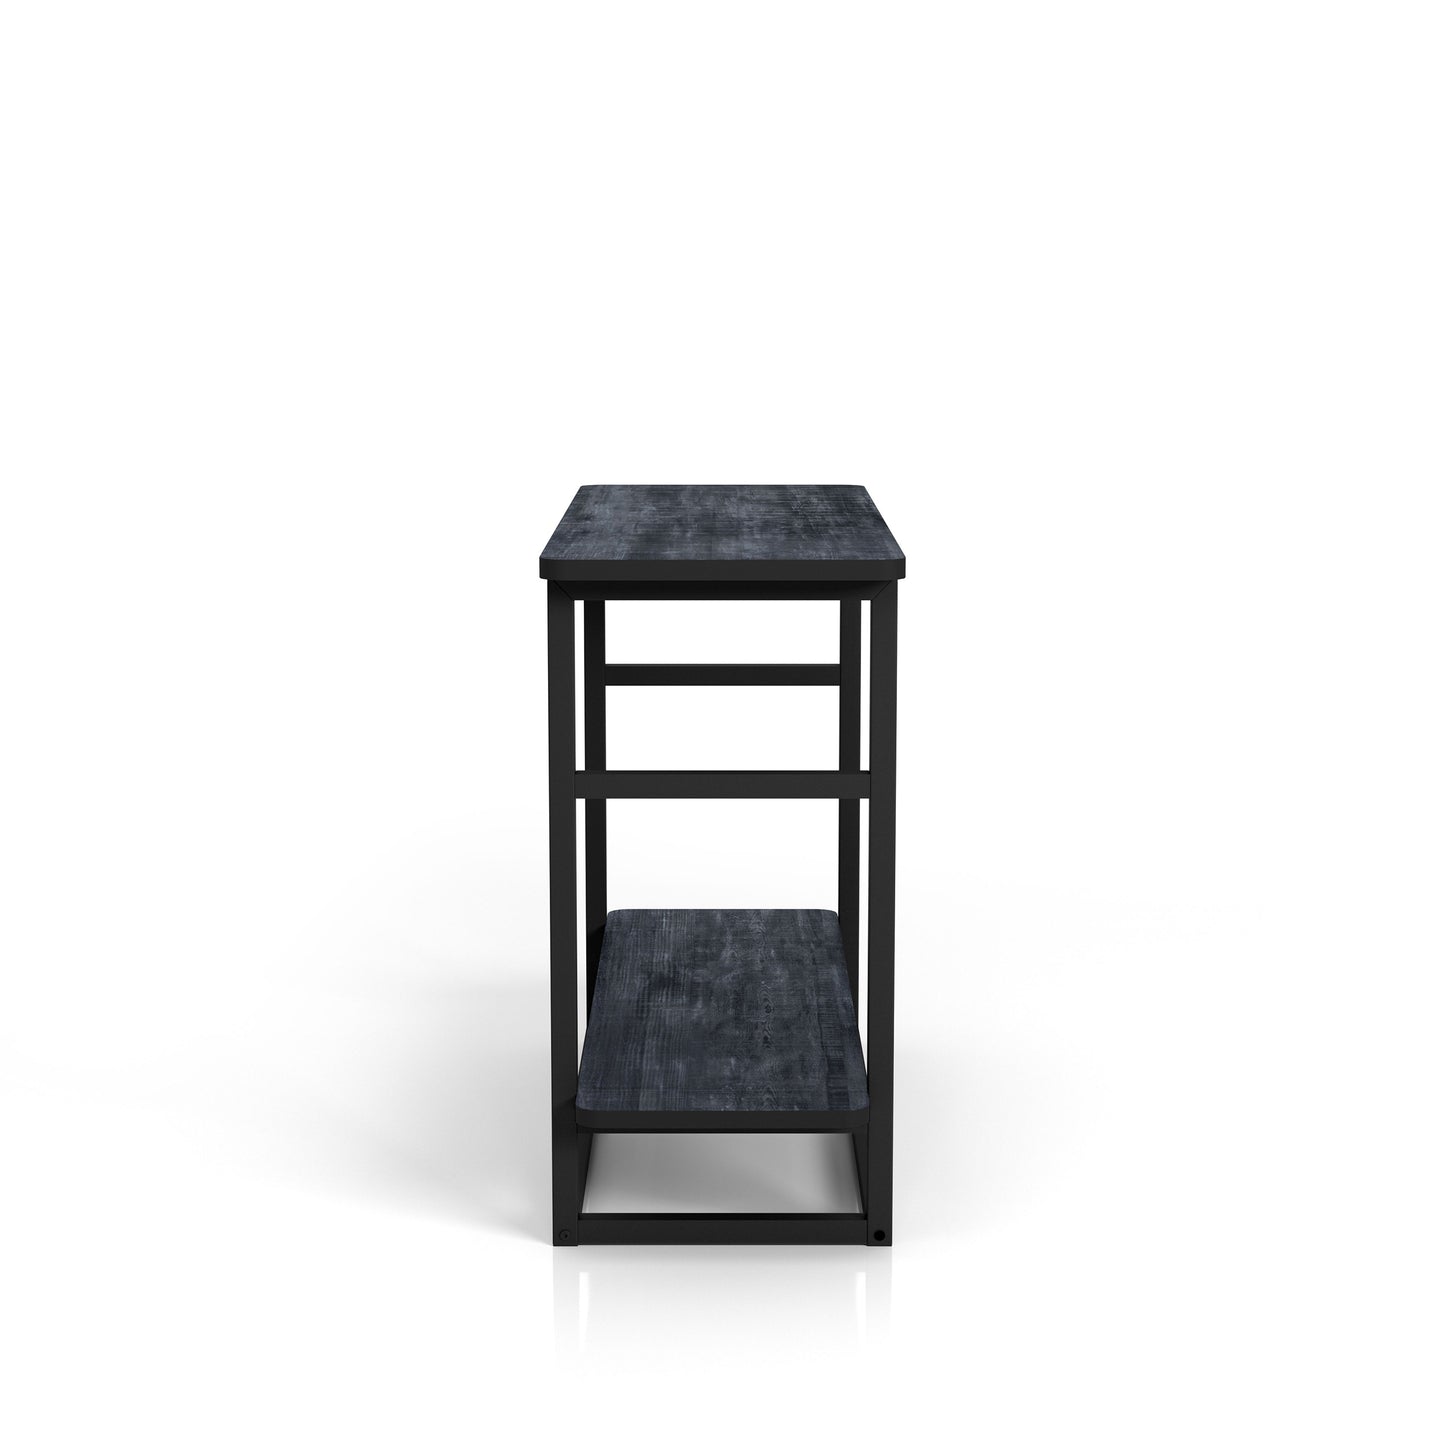 Front-facing industrial rustic navy blue one-shelf long side table on a white background